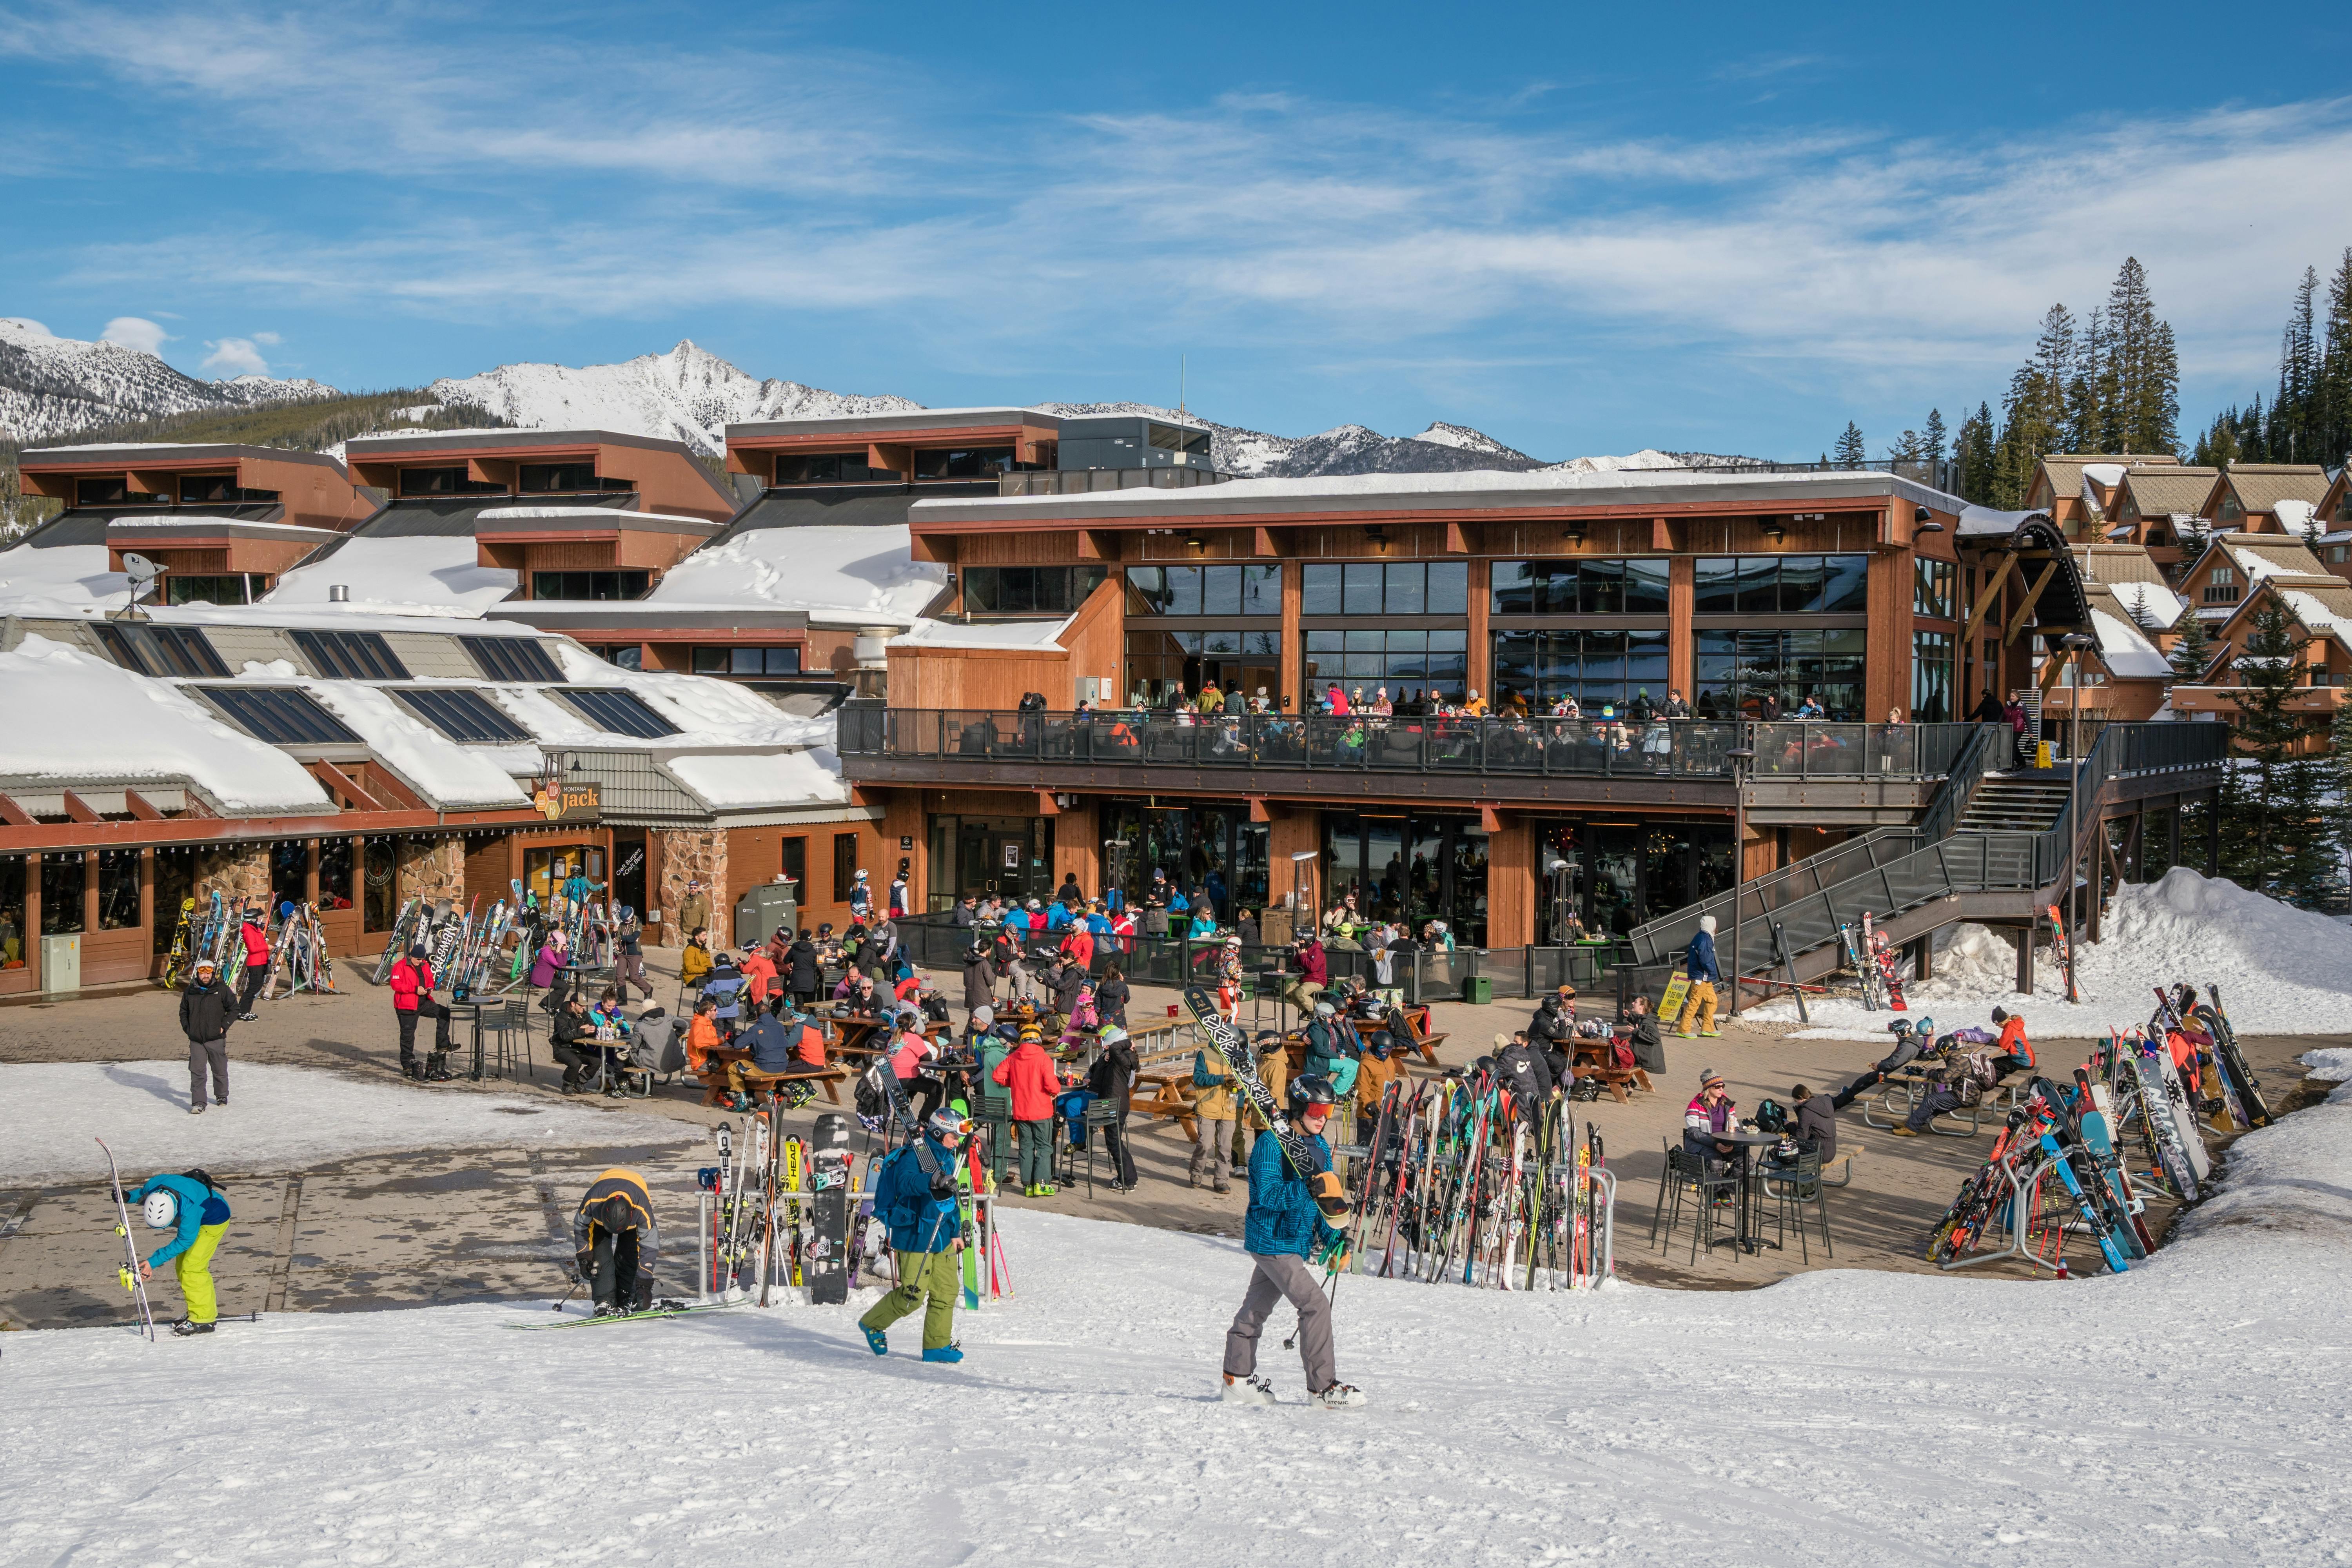 What Are the Best Resorts for Spring Skiing?